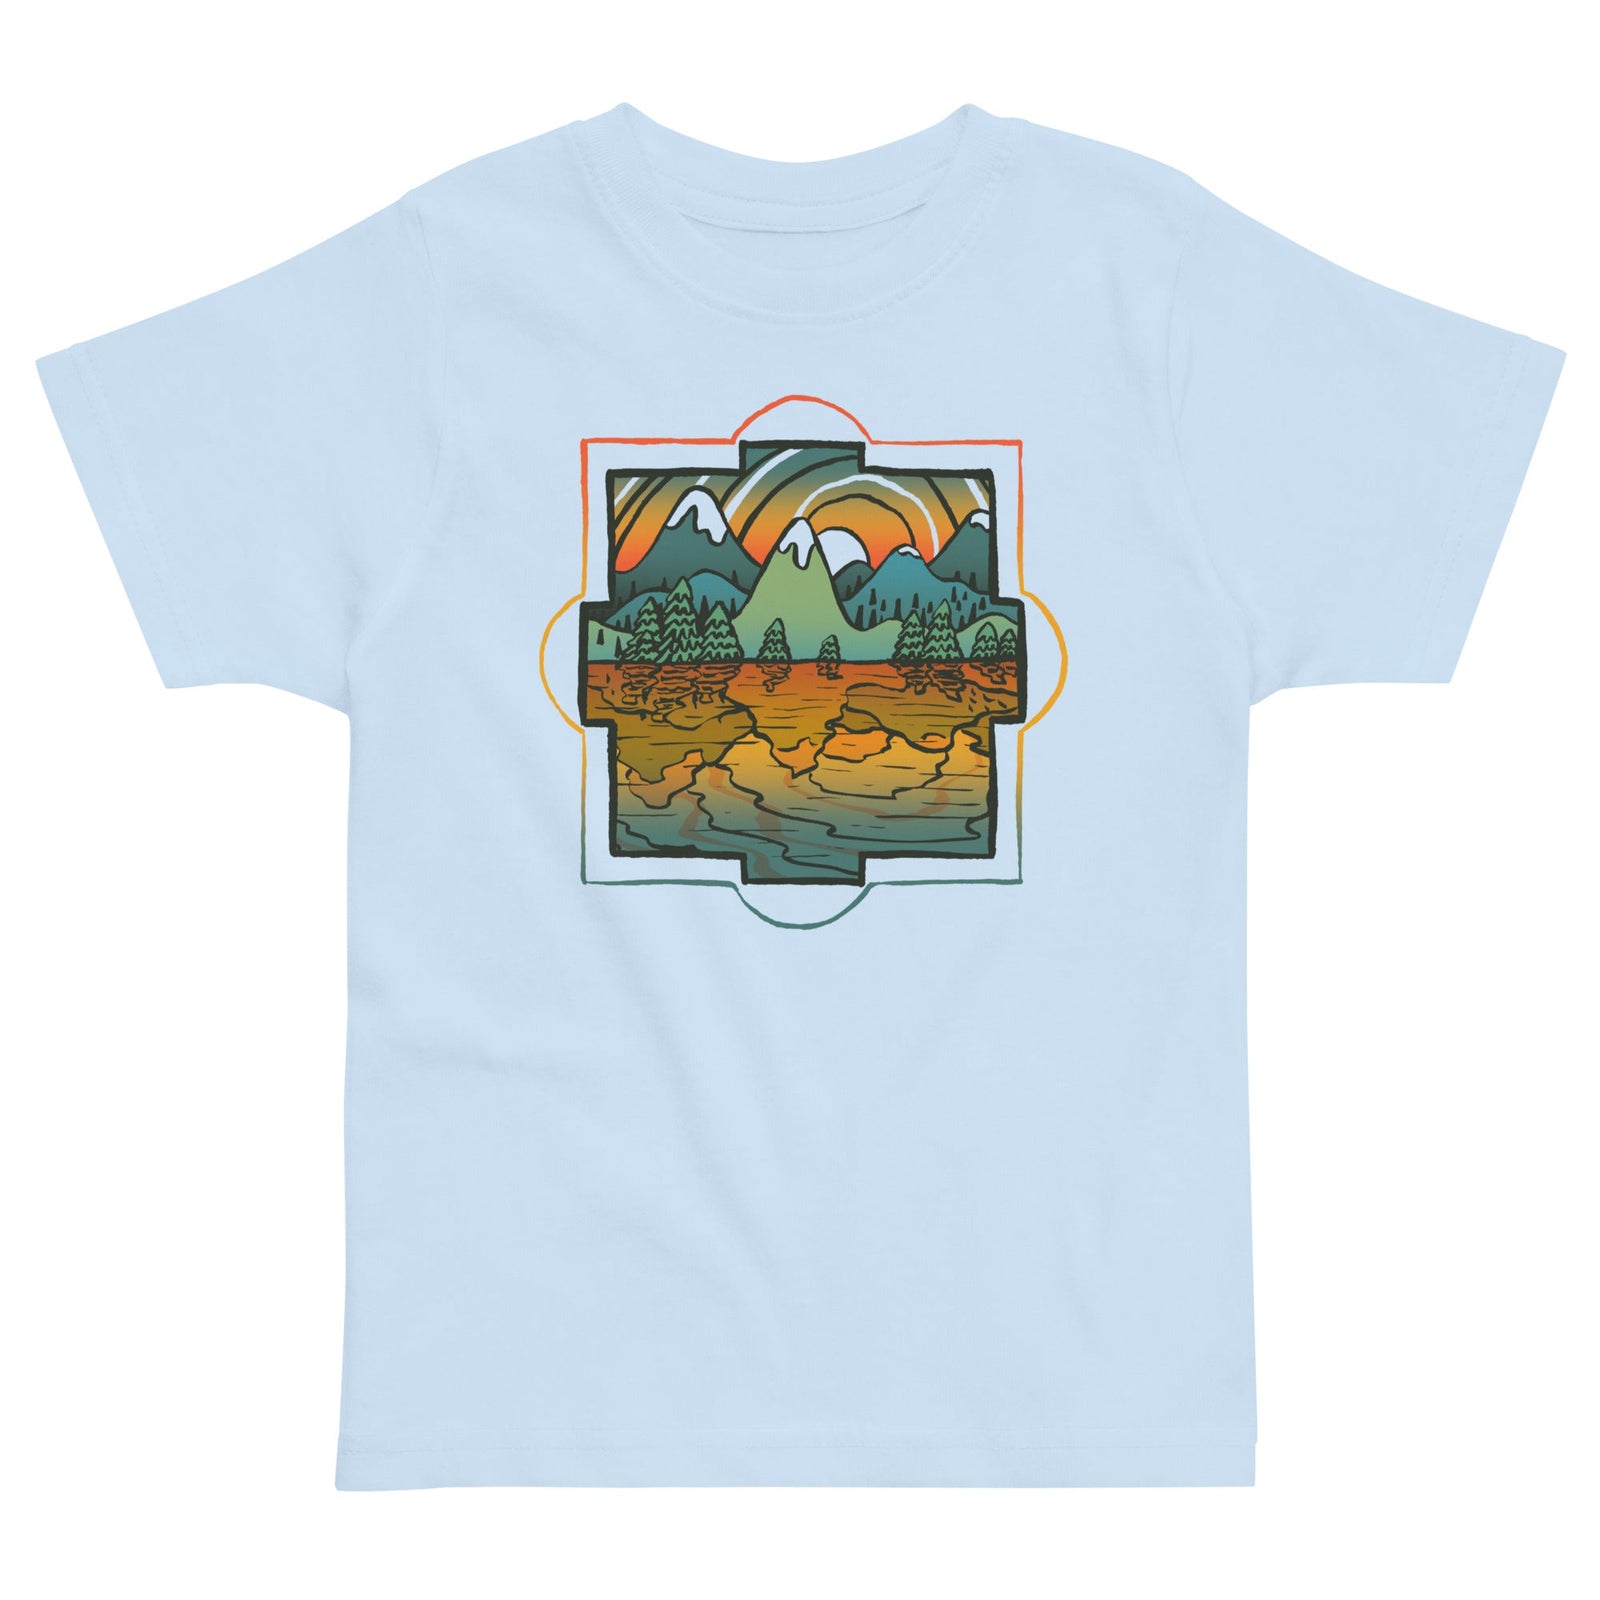 Toddler's Reflections Cool Extra Soft T-Shirt | Retro Artsy Landscape Tee | Solid Threads